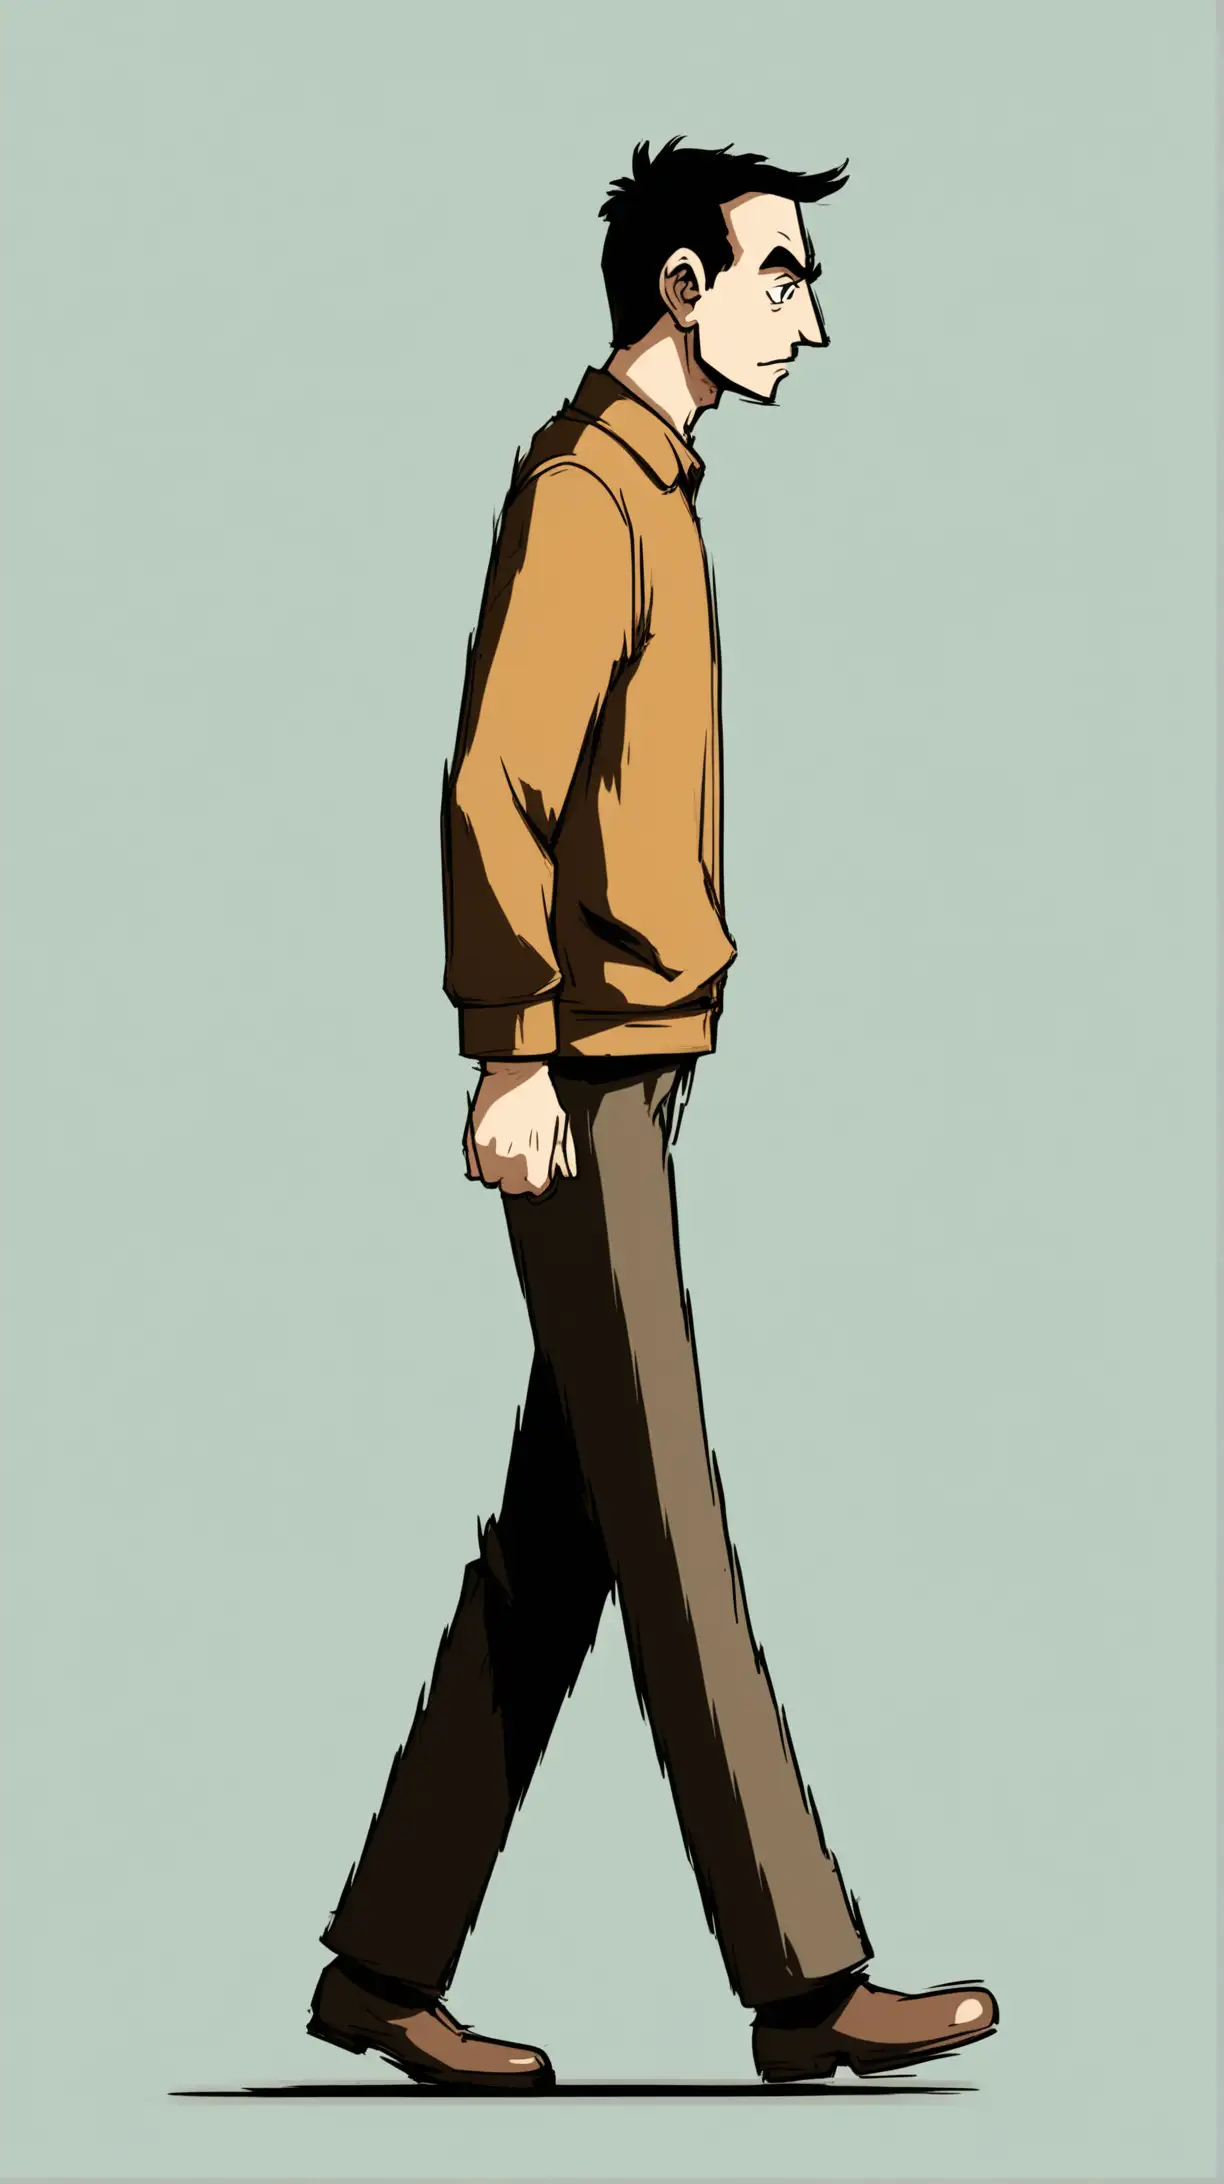 
Cartoony, color, full body. From the side a man walking with no expression.  Simple background
